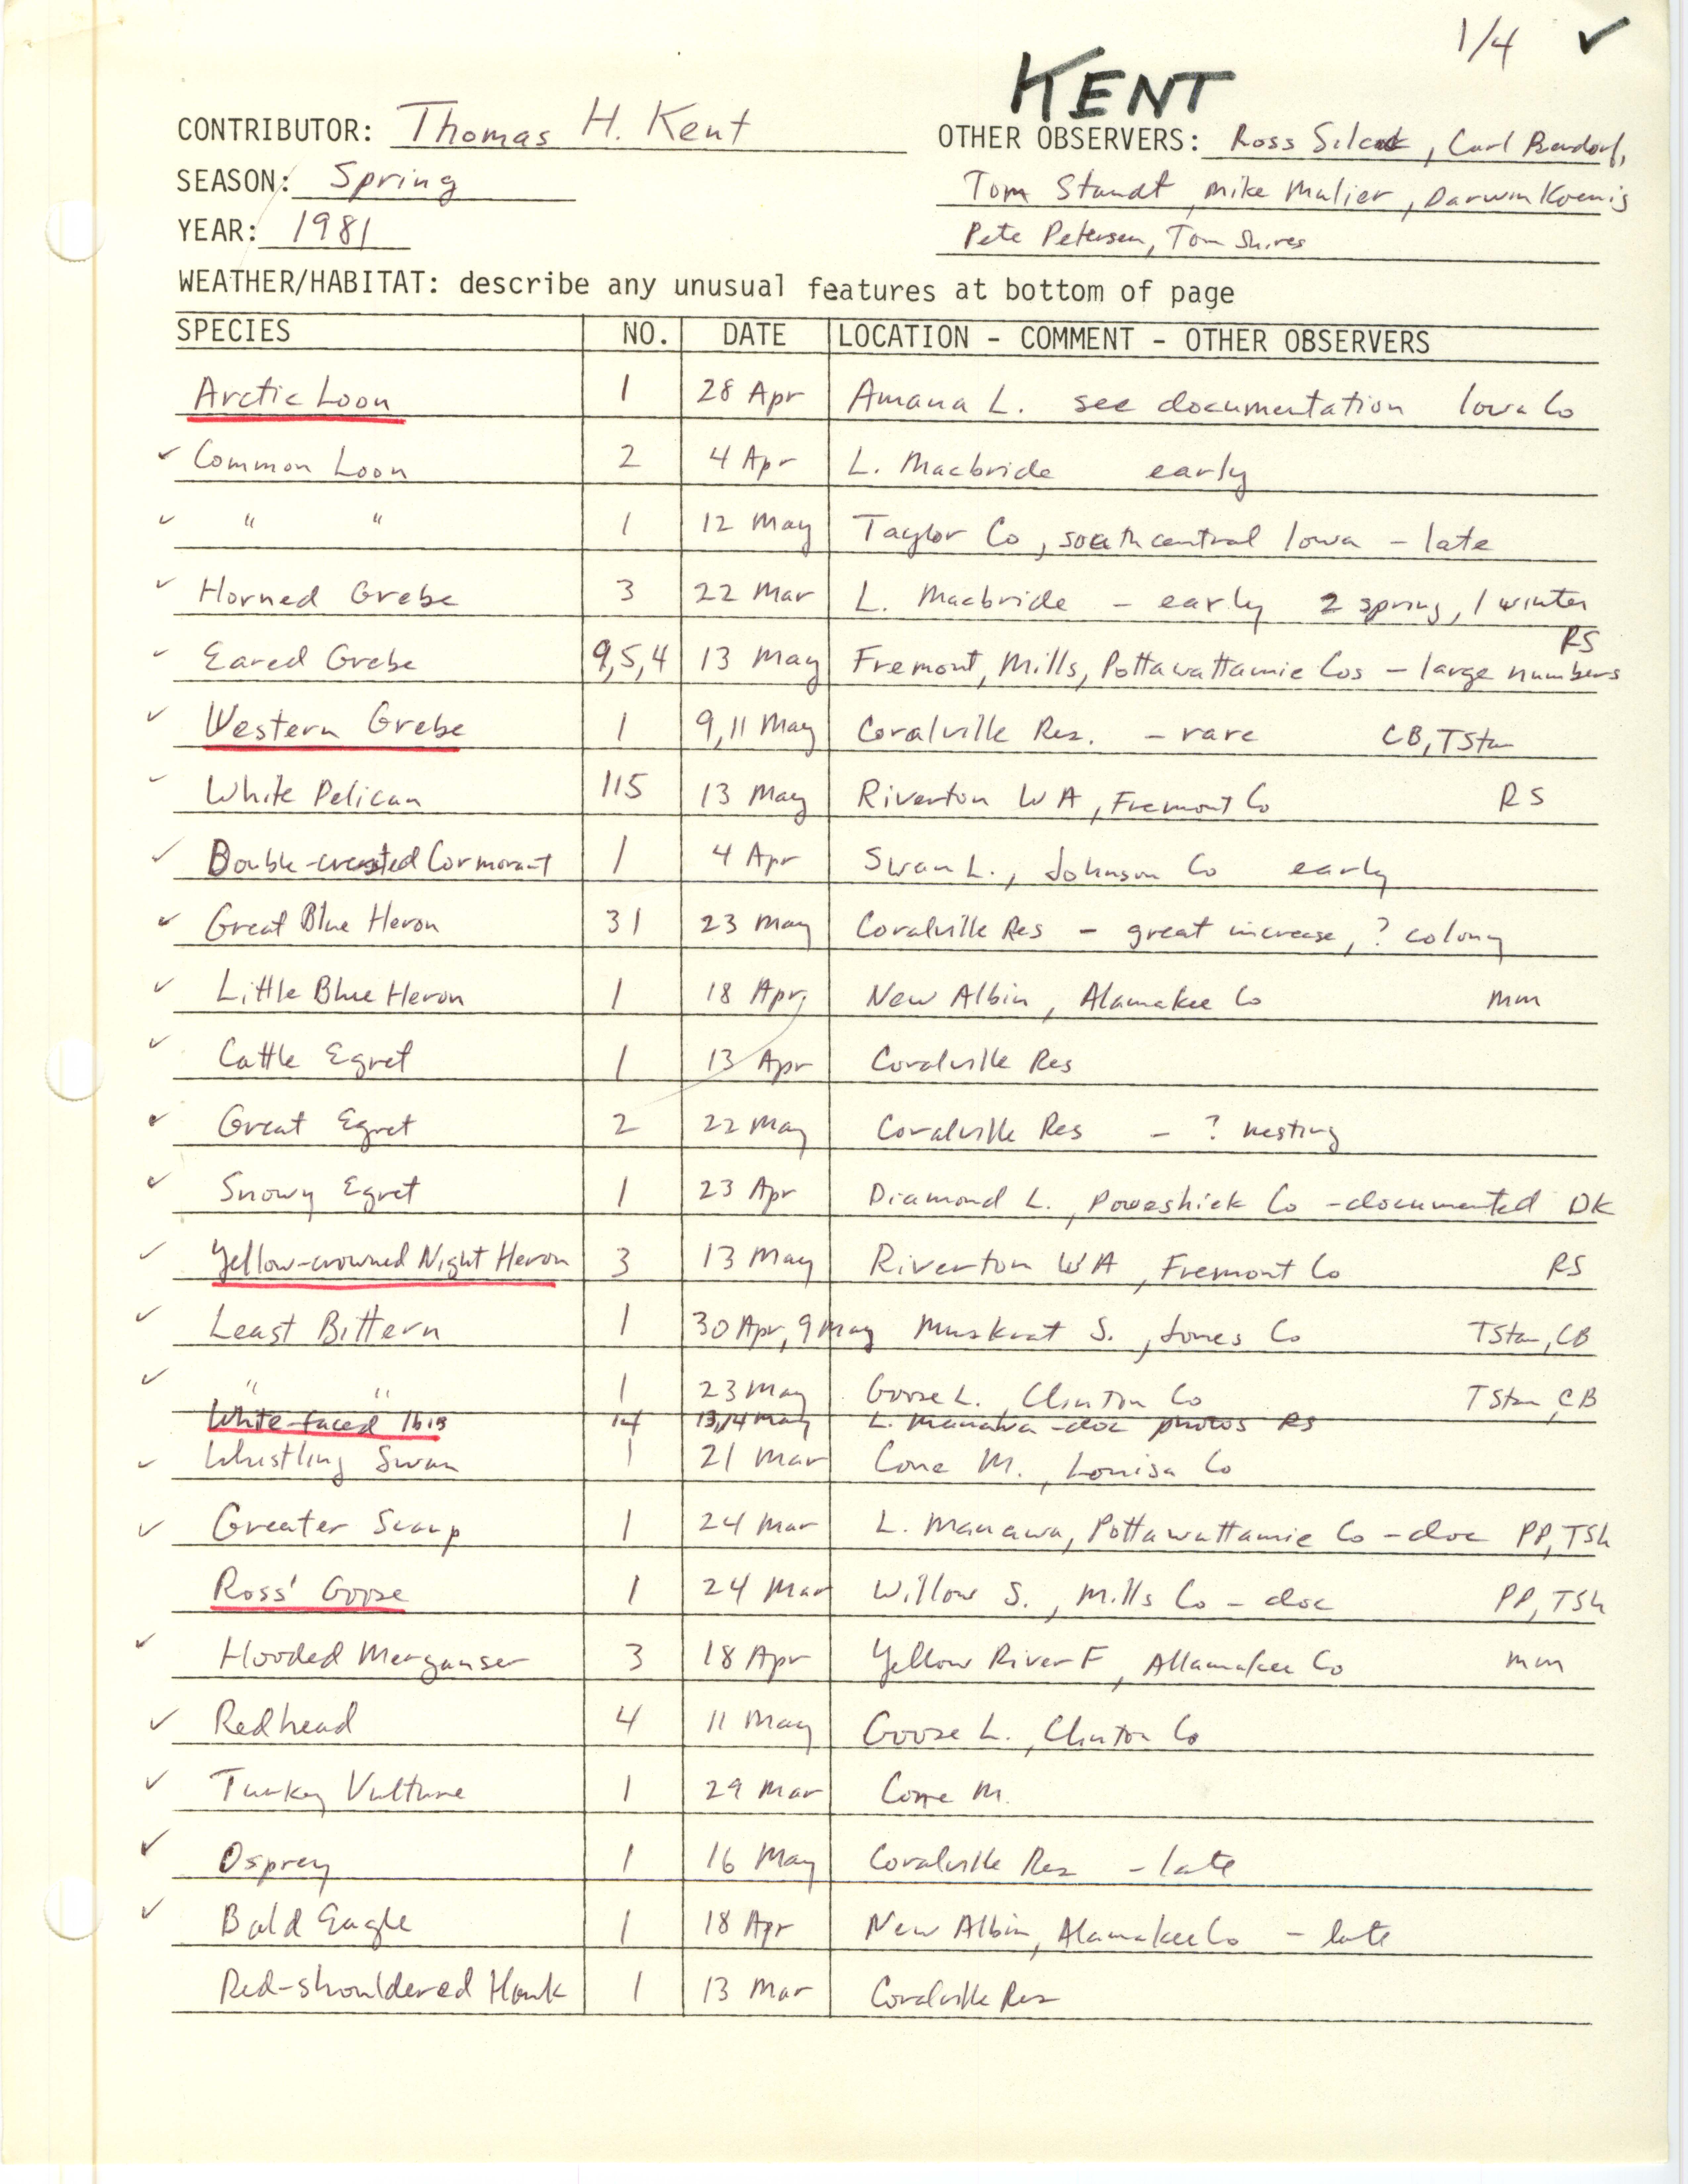 Annotated bird sighting list for spring 1981 compiled by Thomas Kent